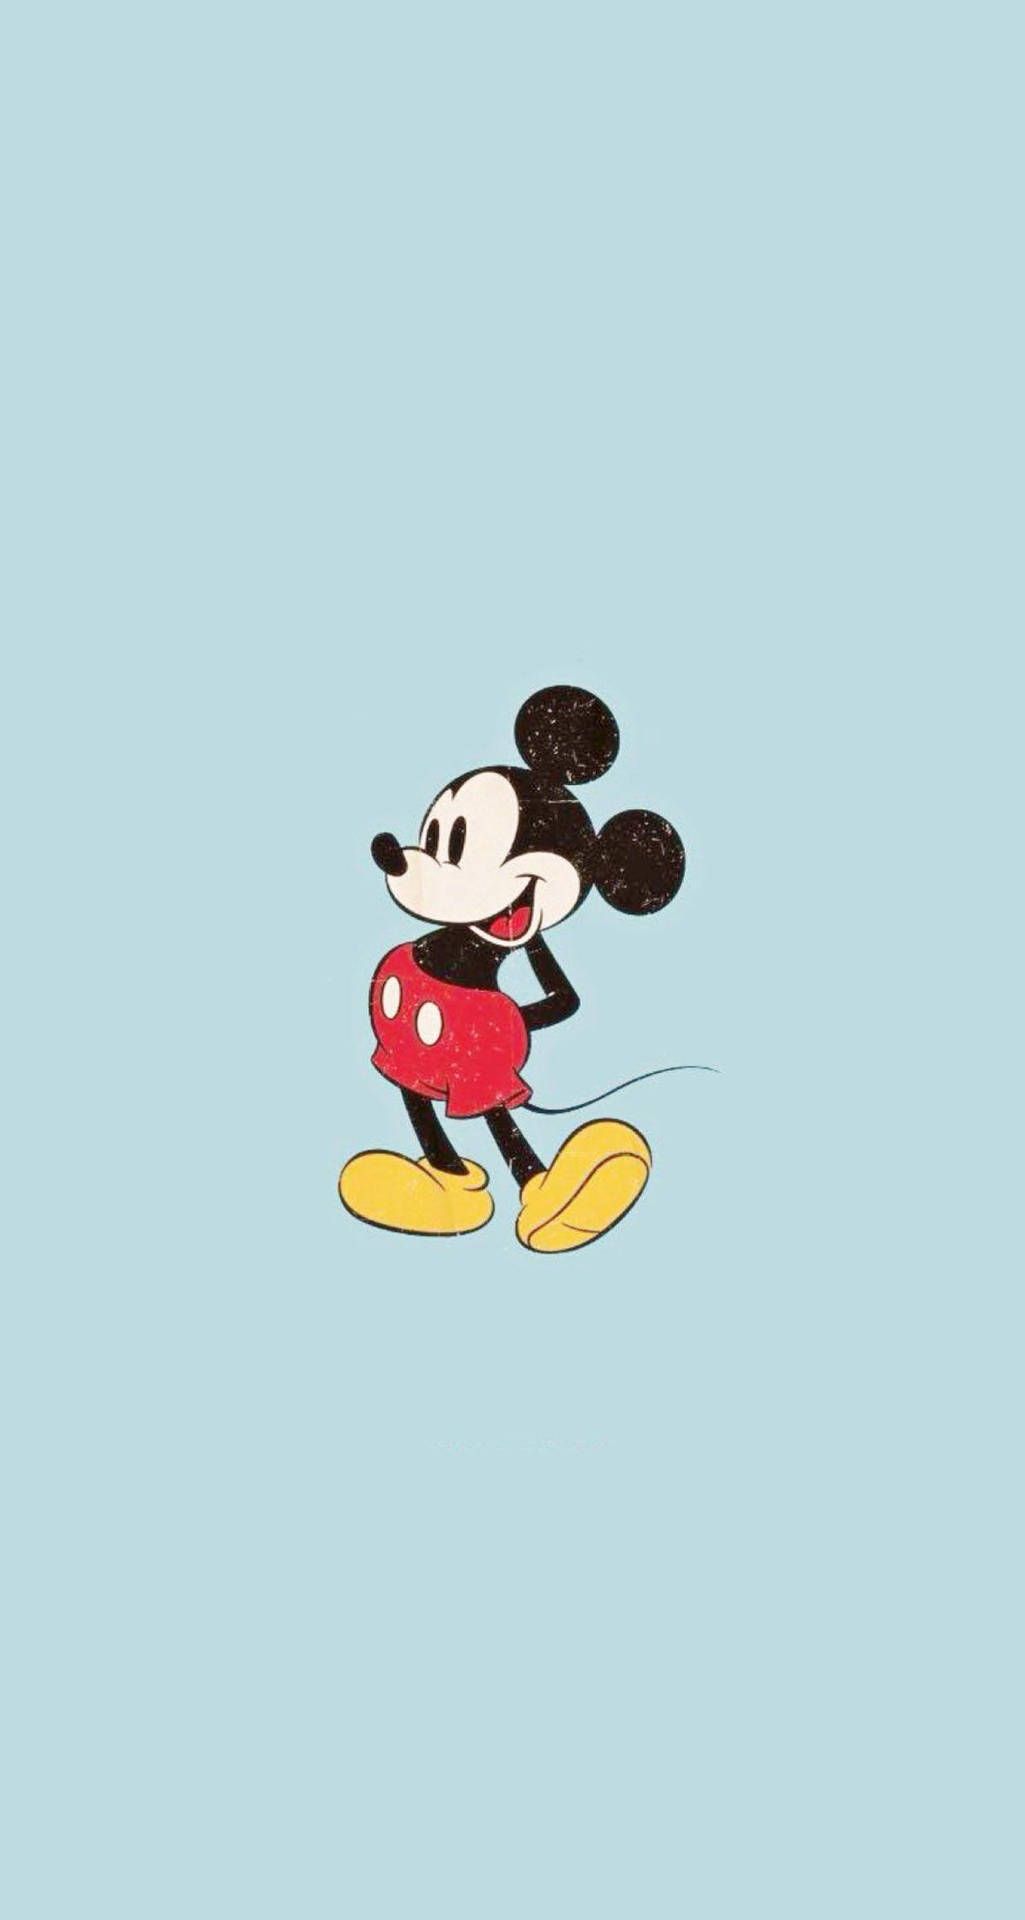 Free Mickey Mouse iPhone Wallpaper Downloads, Mickey Mouse iPhone Wallpaper for FREE